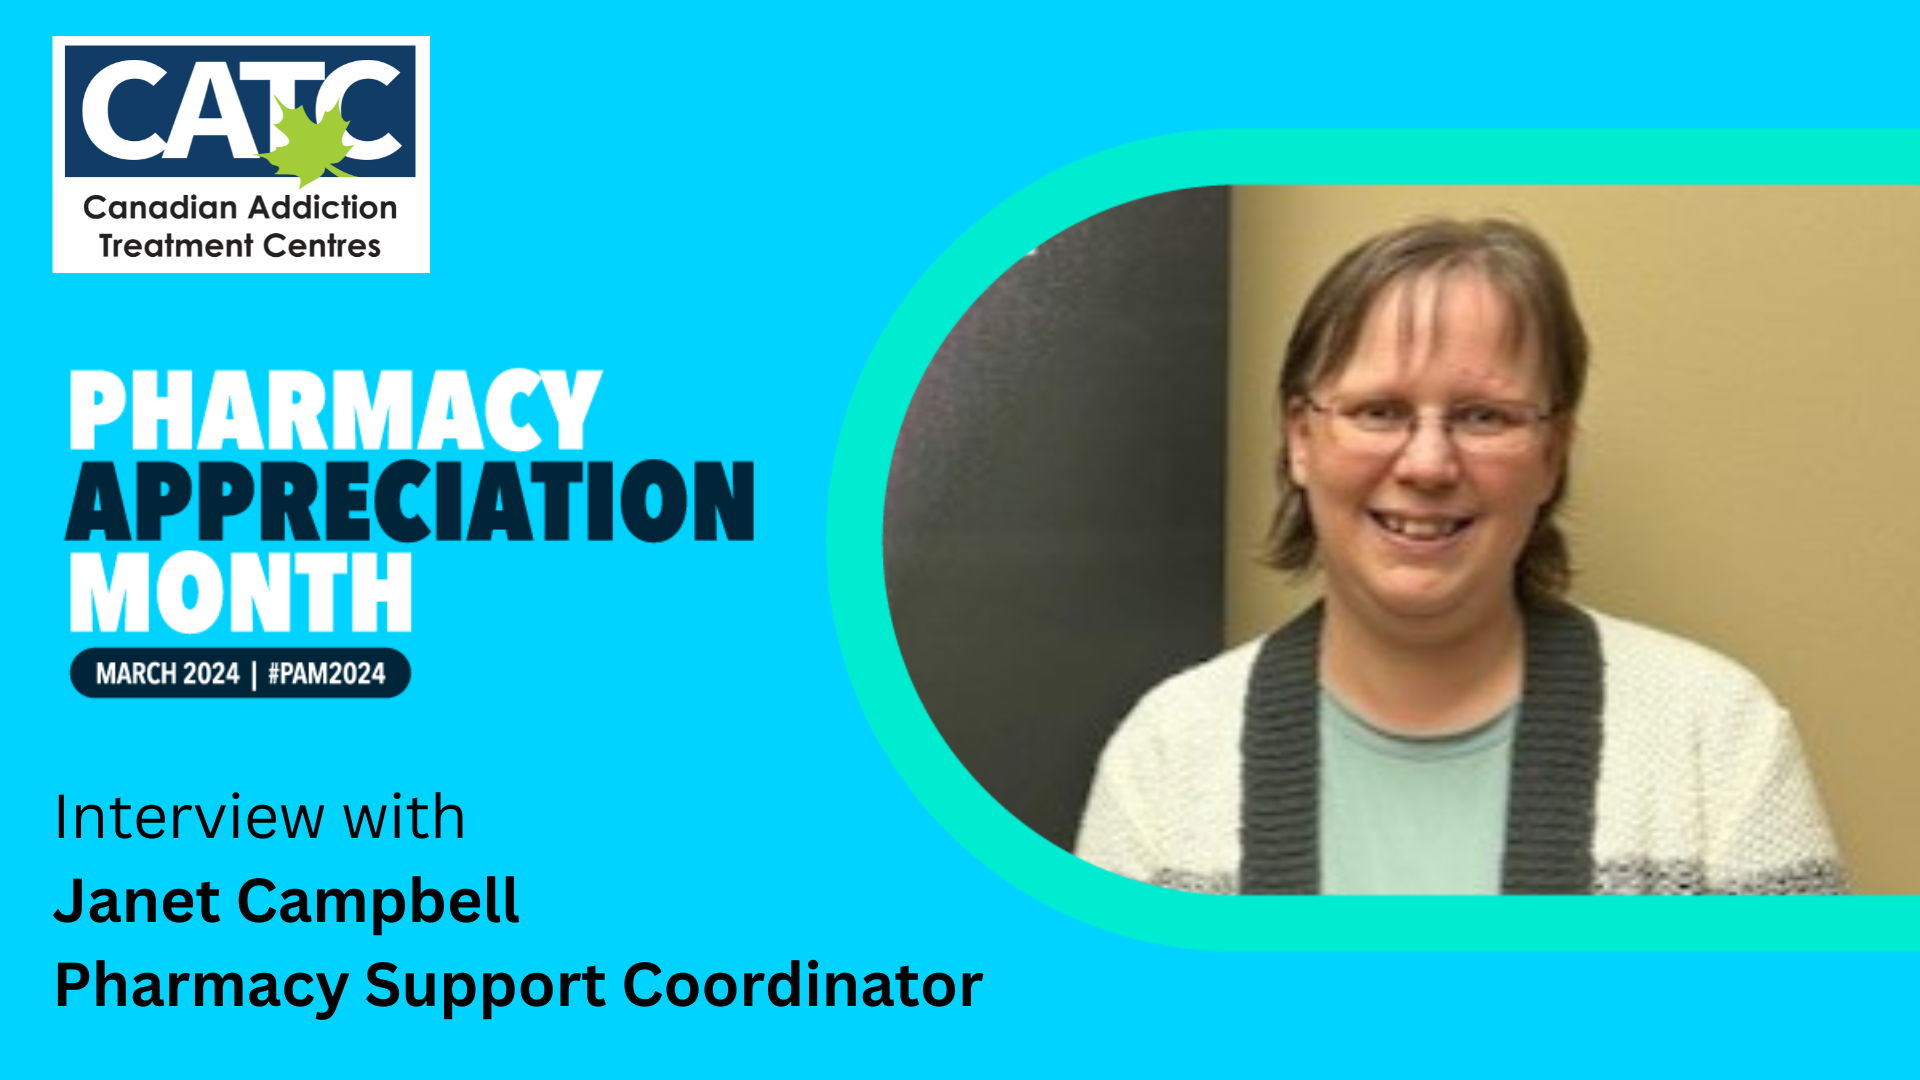 Interview with Janet Campbell during pharmacy appreciation month